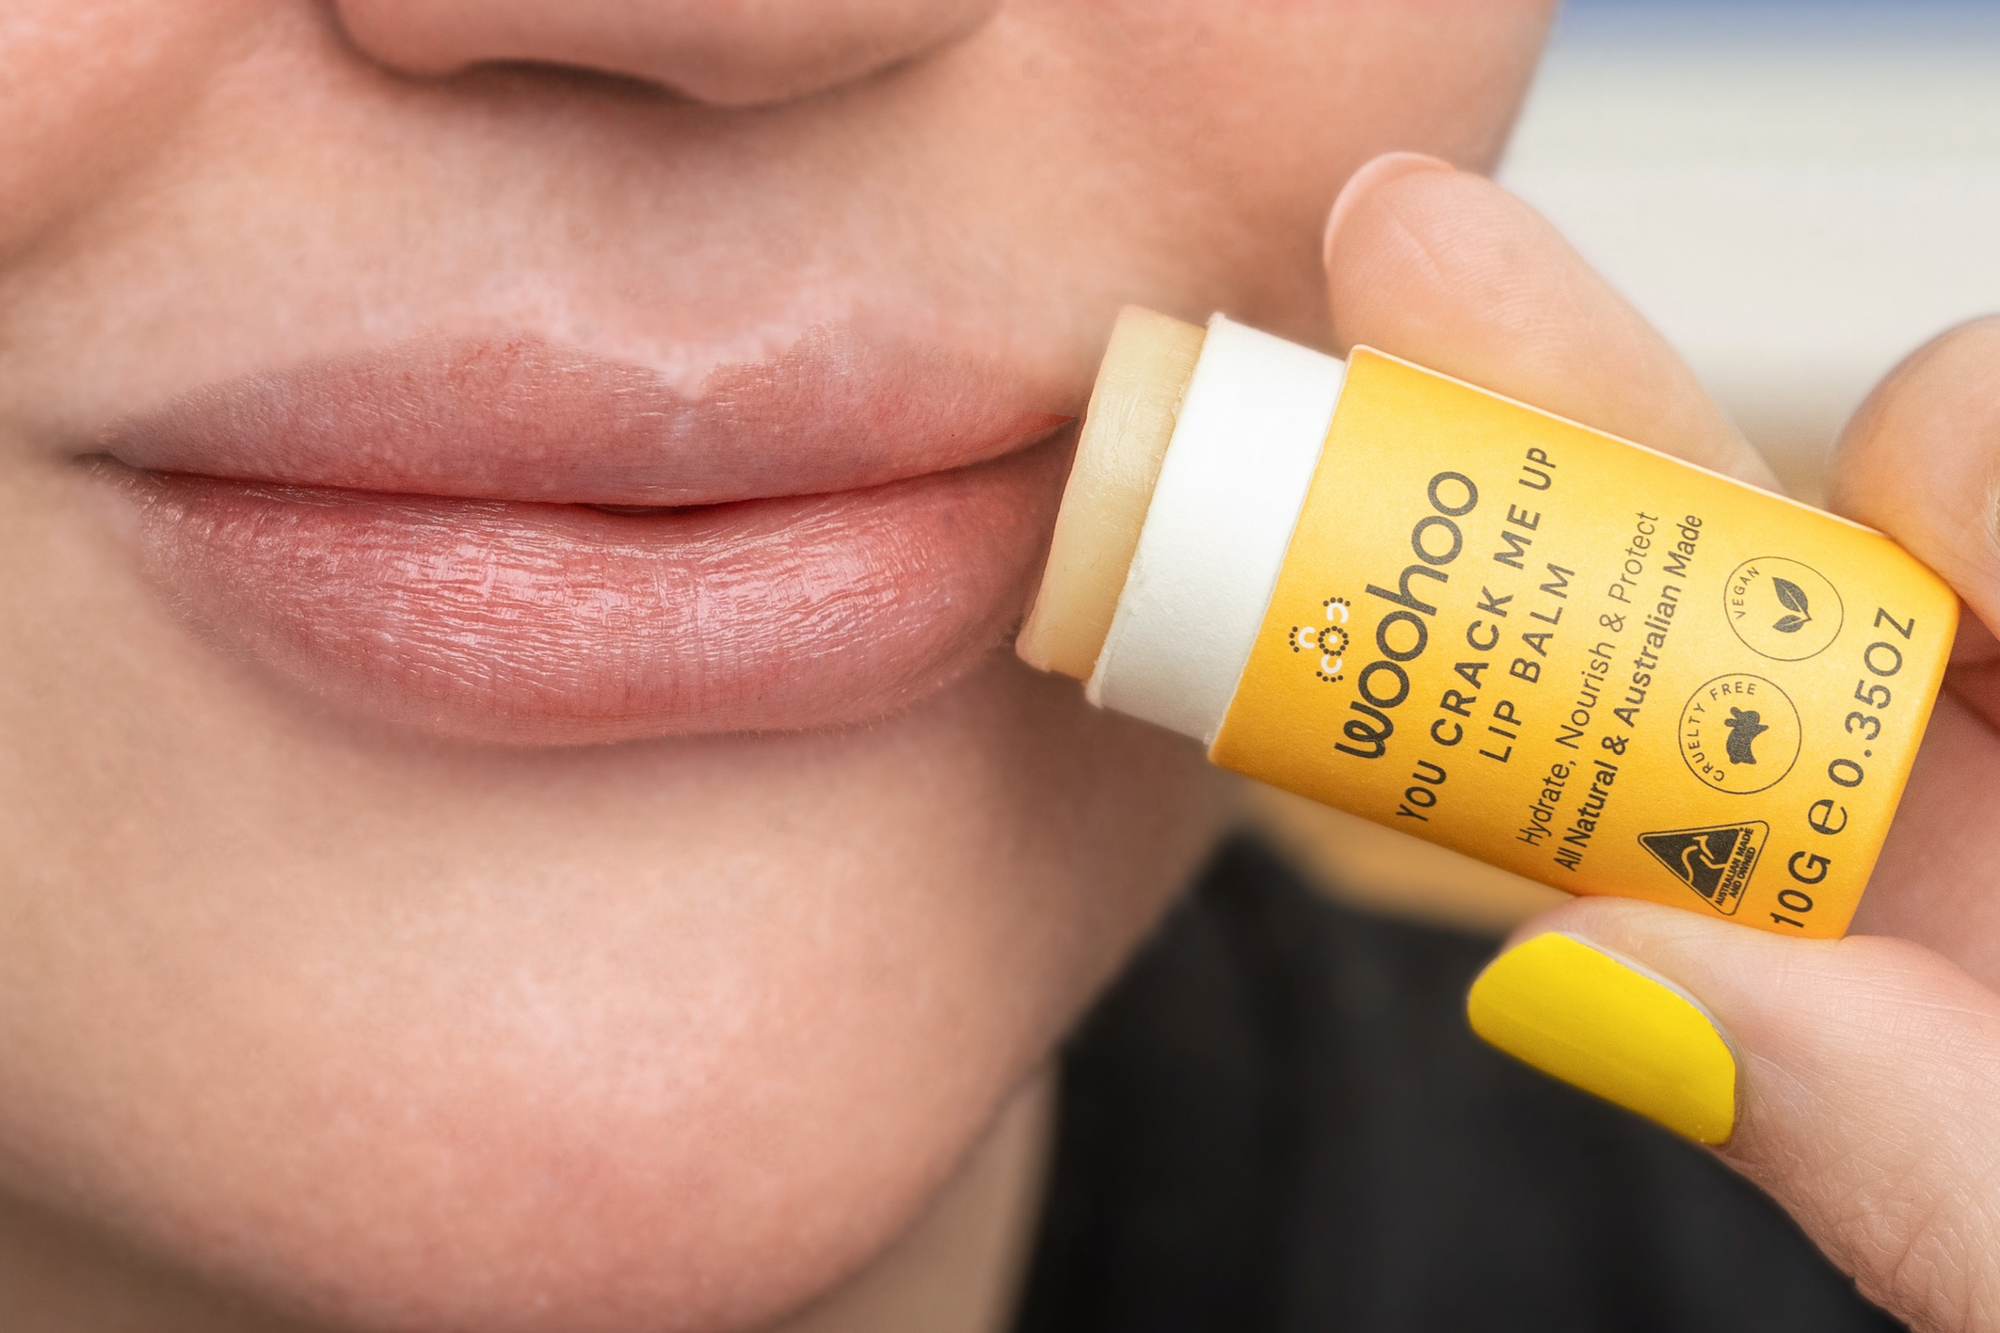 How to use your 'You Crack Me Up!' Lip Balm